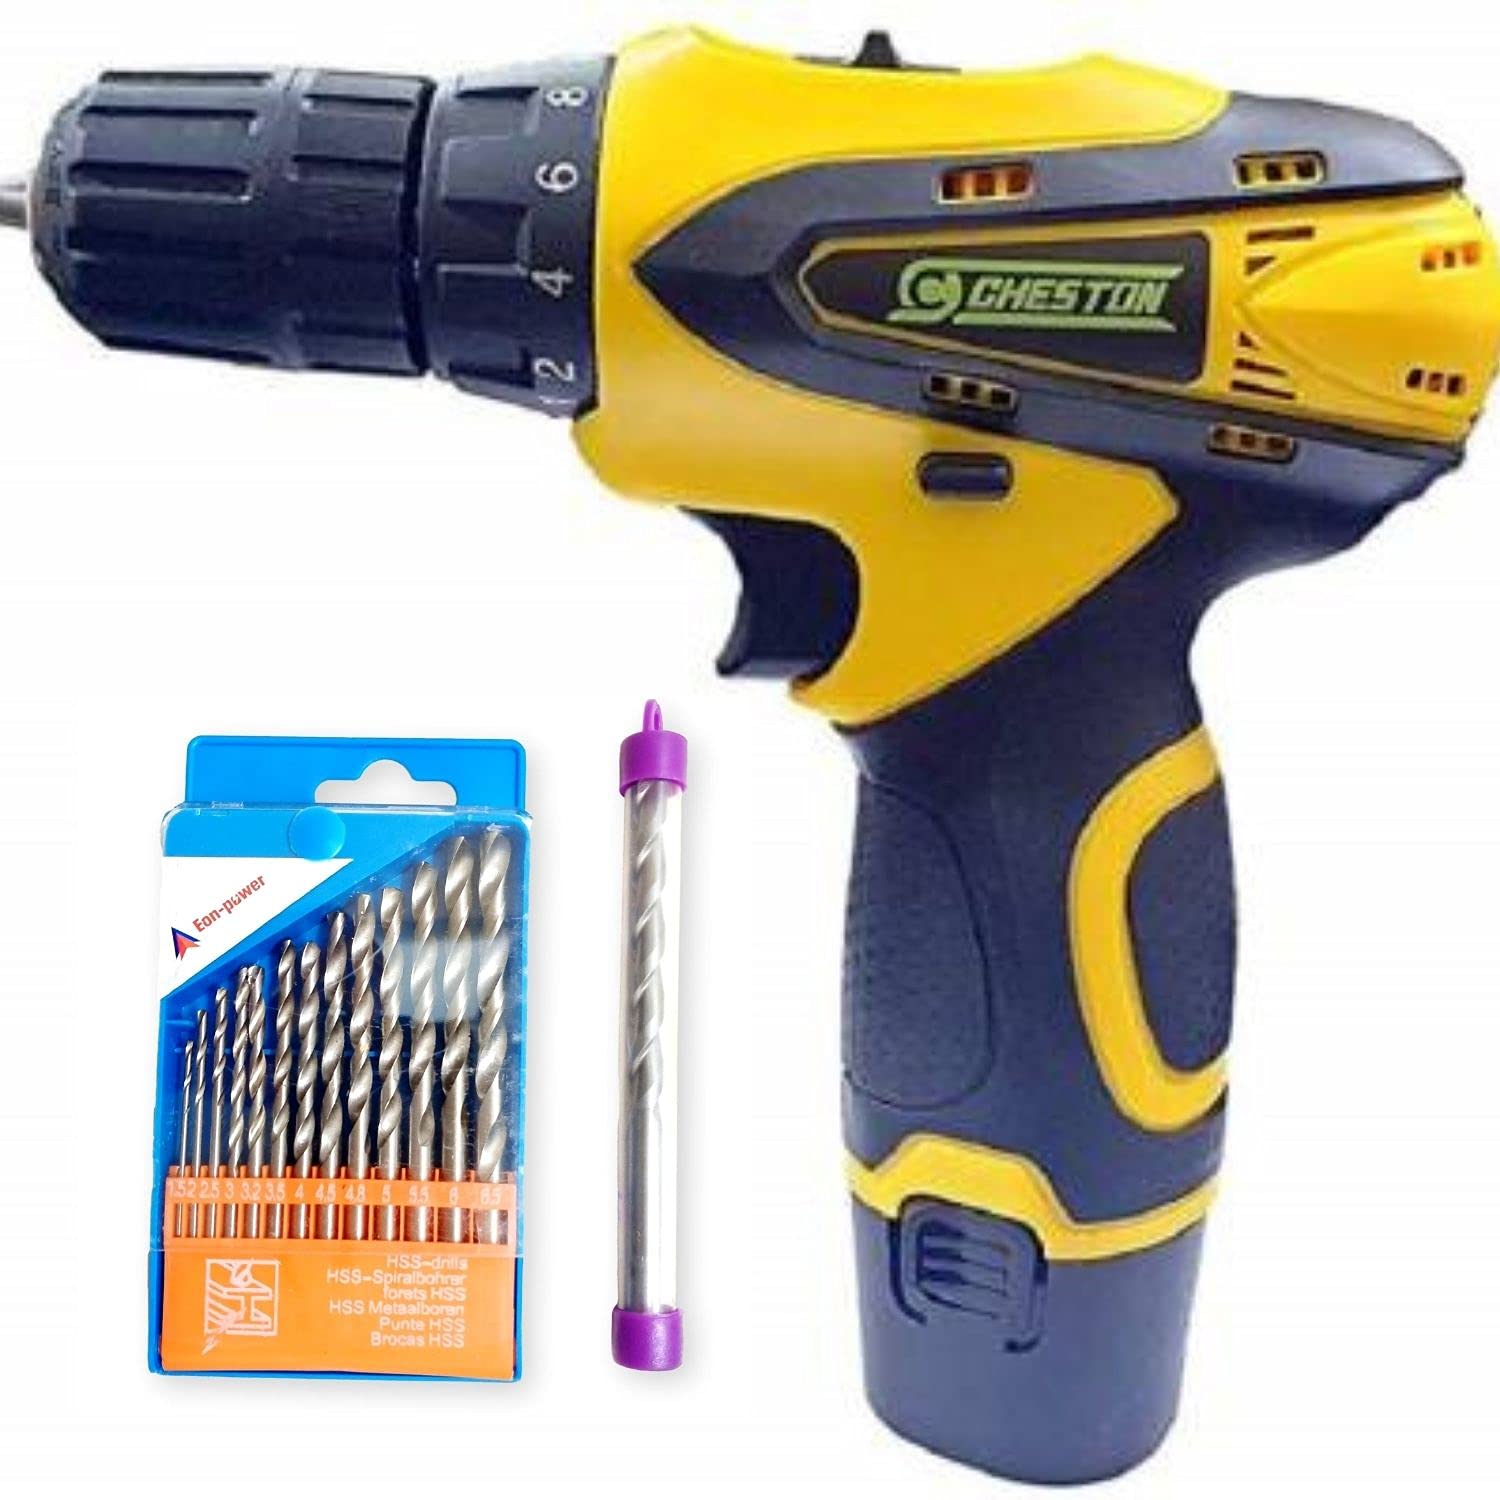 Cheston 10 mm Dual Speed Keyless Chuck 12V Cordless Drill/Screwdriver with, LED Torch Variable Speed. rpm= 0-350, 1350